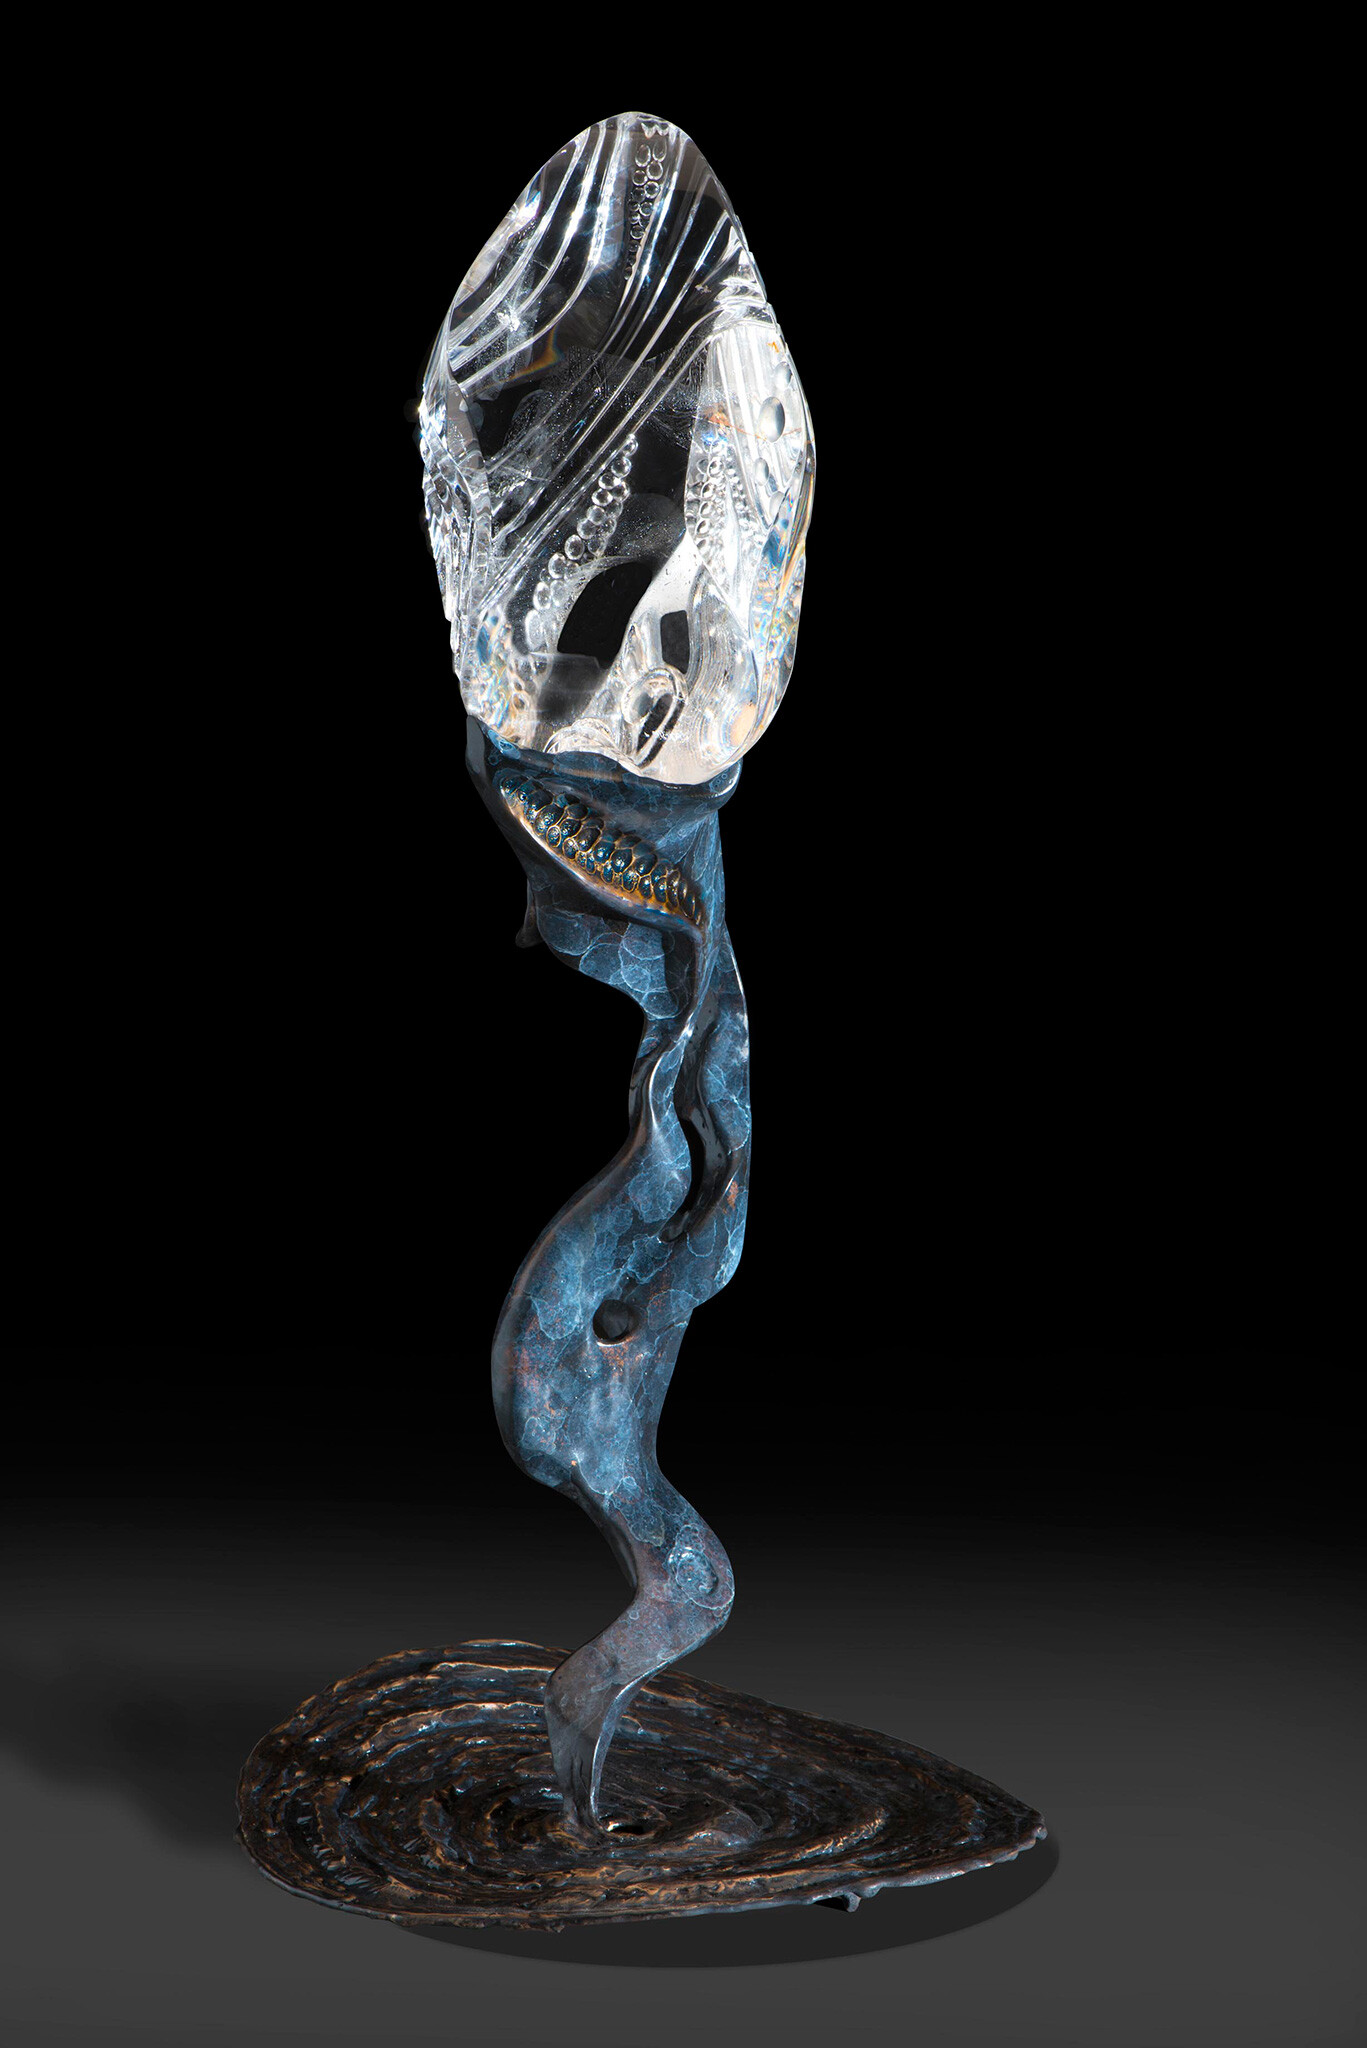 Spectacular gemstone sculptures by Lawrence Stoller